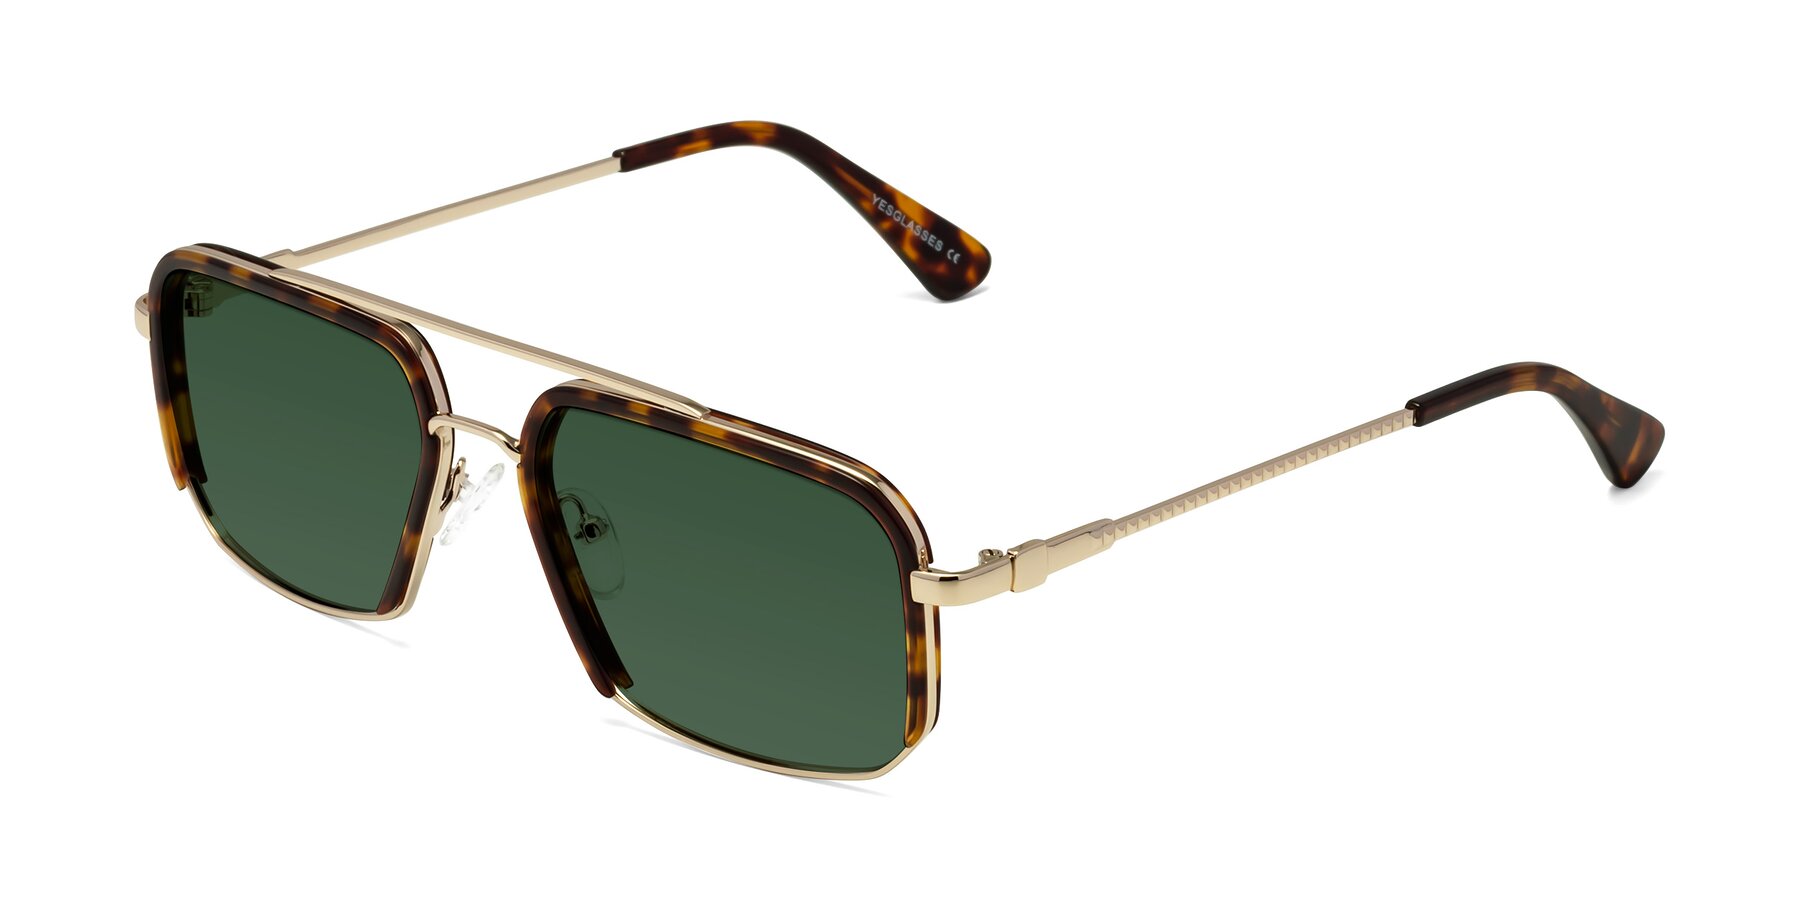 Angle of Dechter in Tortoise-Gold with Green Tinted Lenses